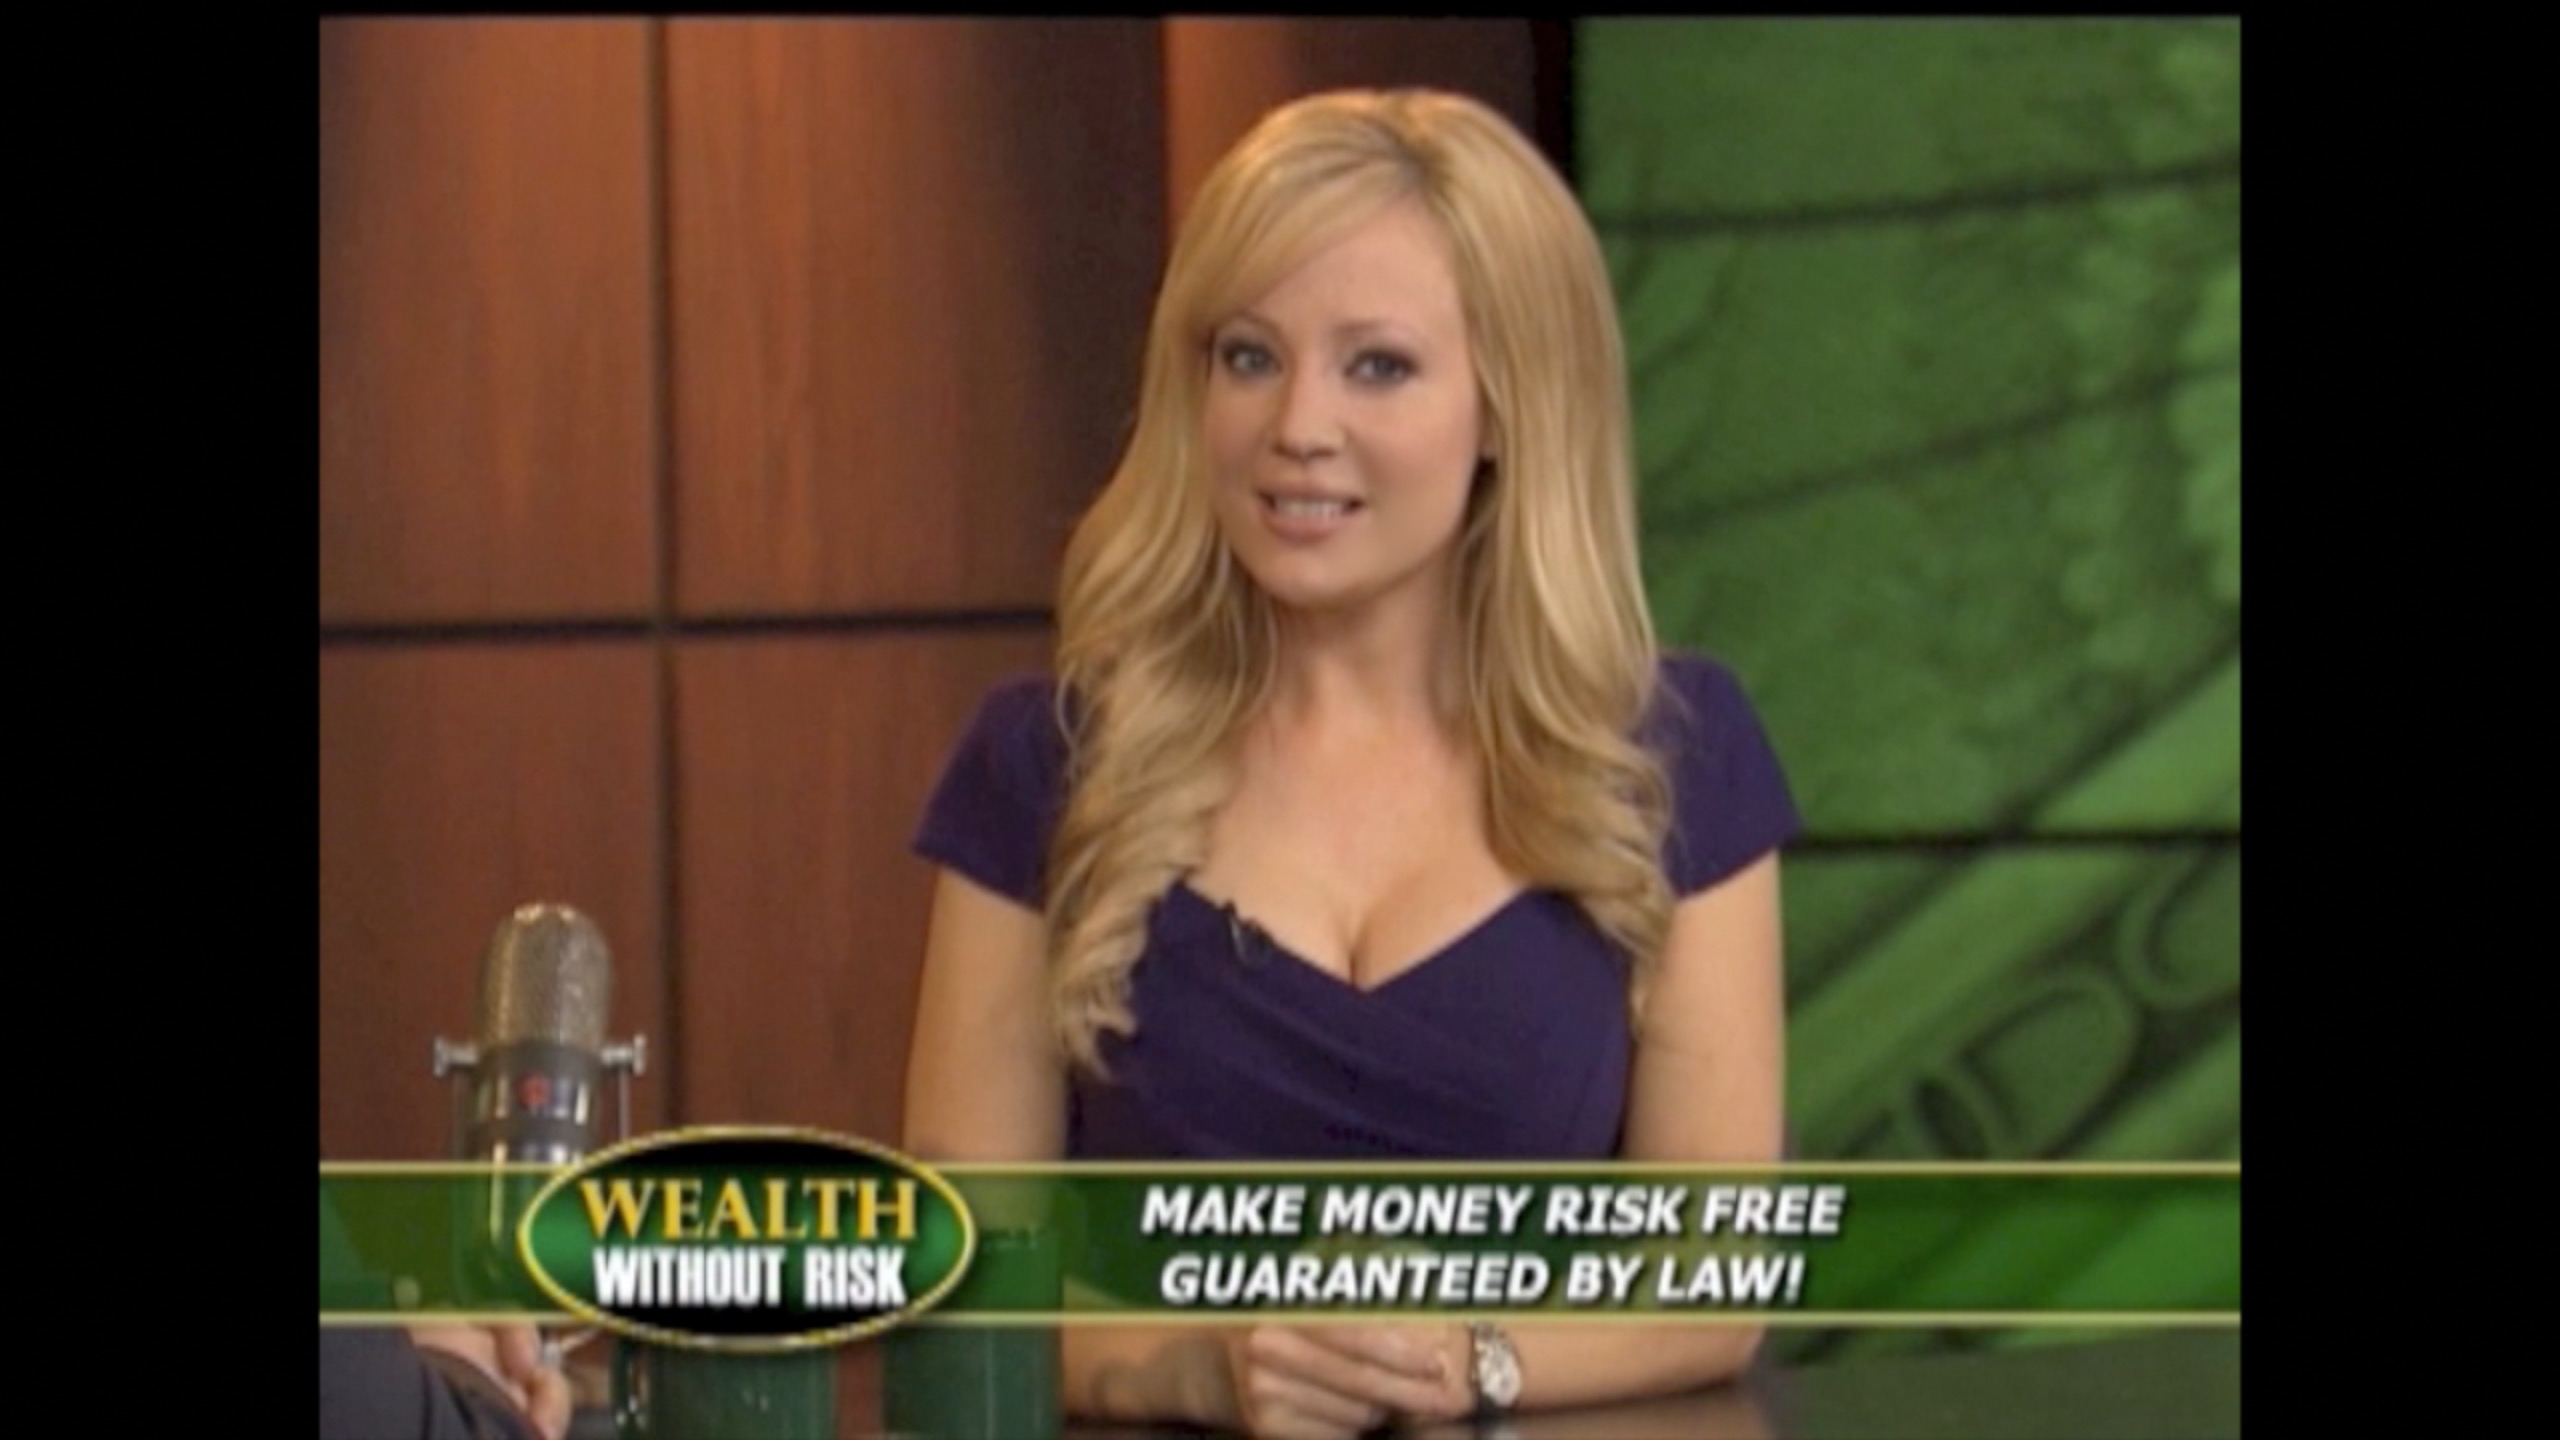 Screen grab of host Stacey Hayes on set of infomercial WEALTH WITHOUT RISK